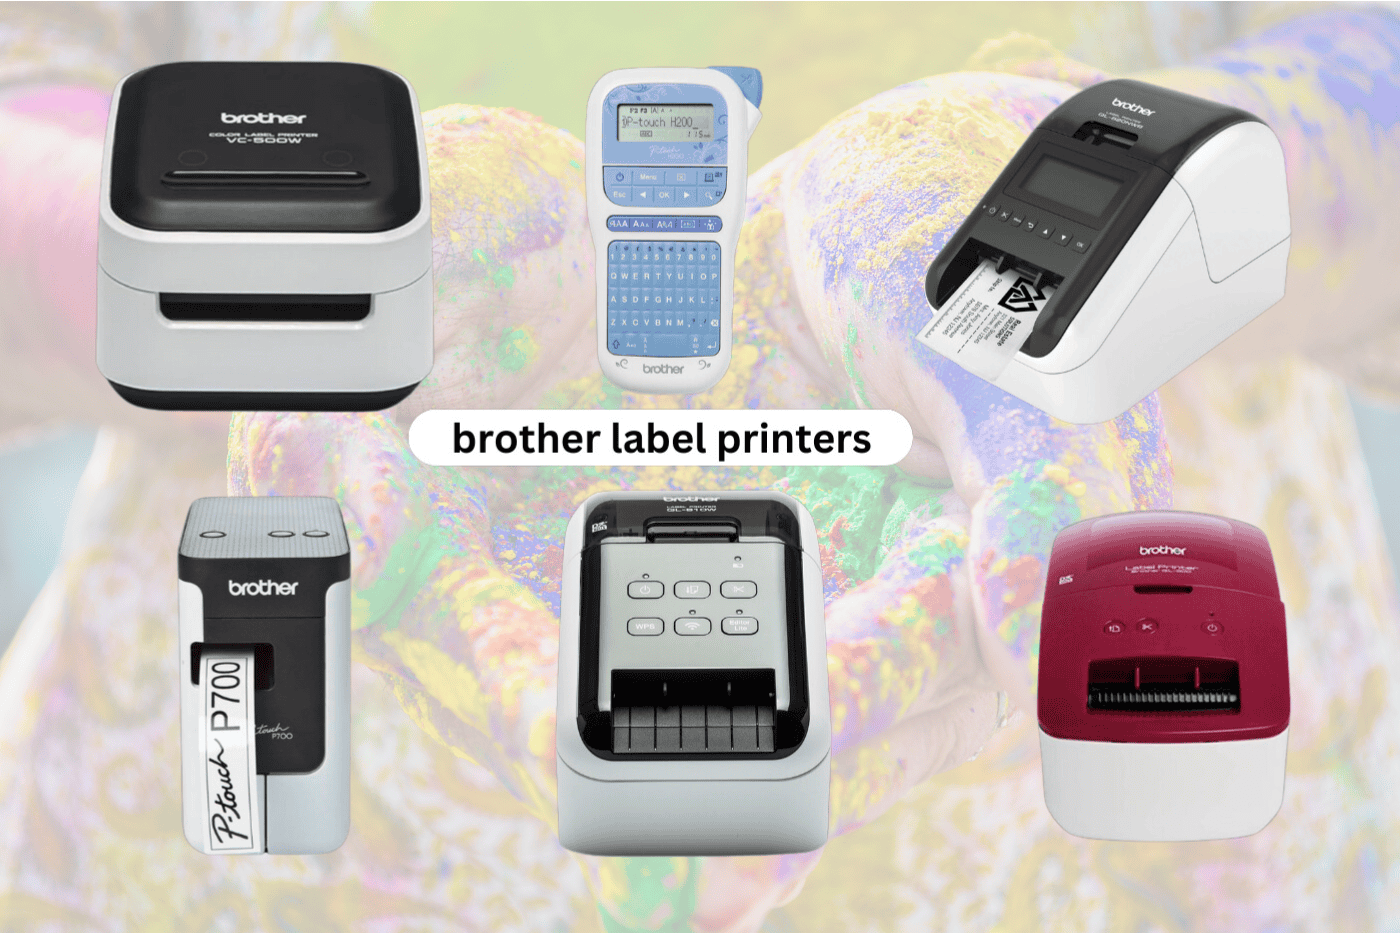 brother label printers, robotechbee.com